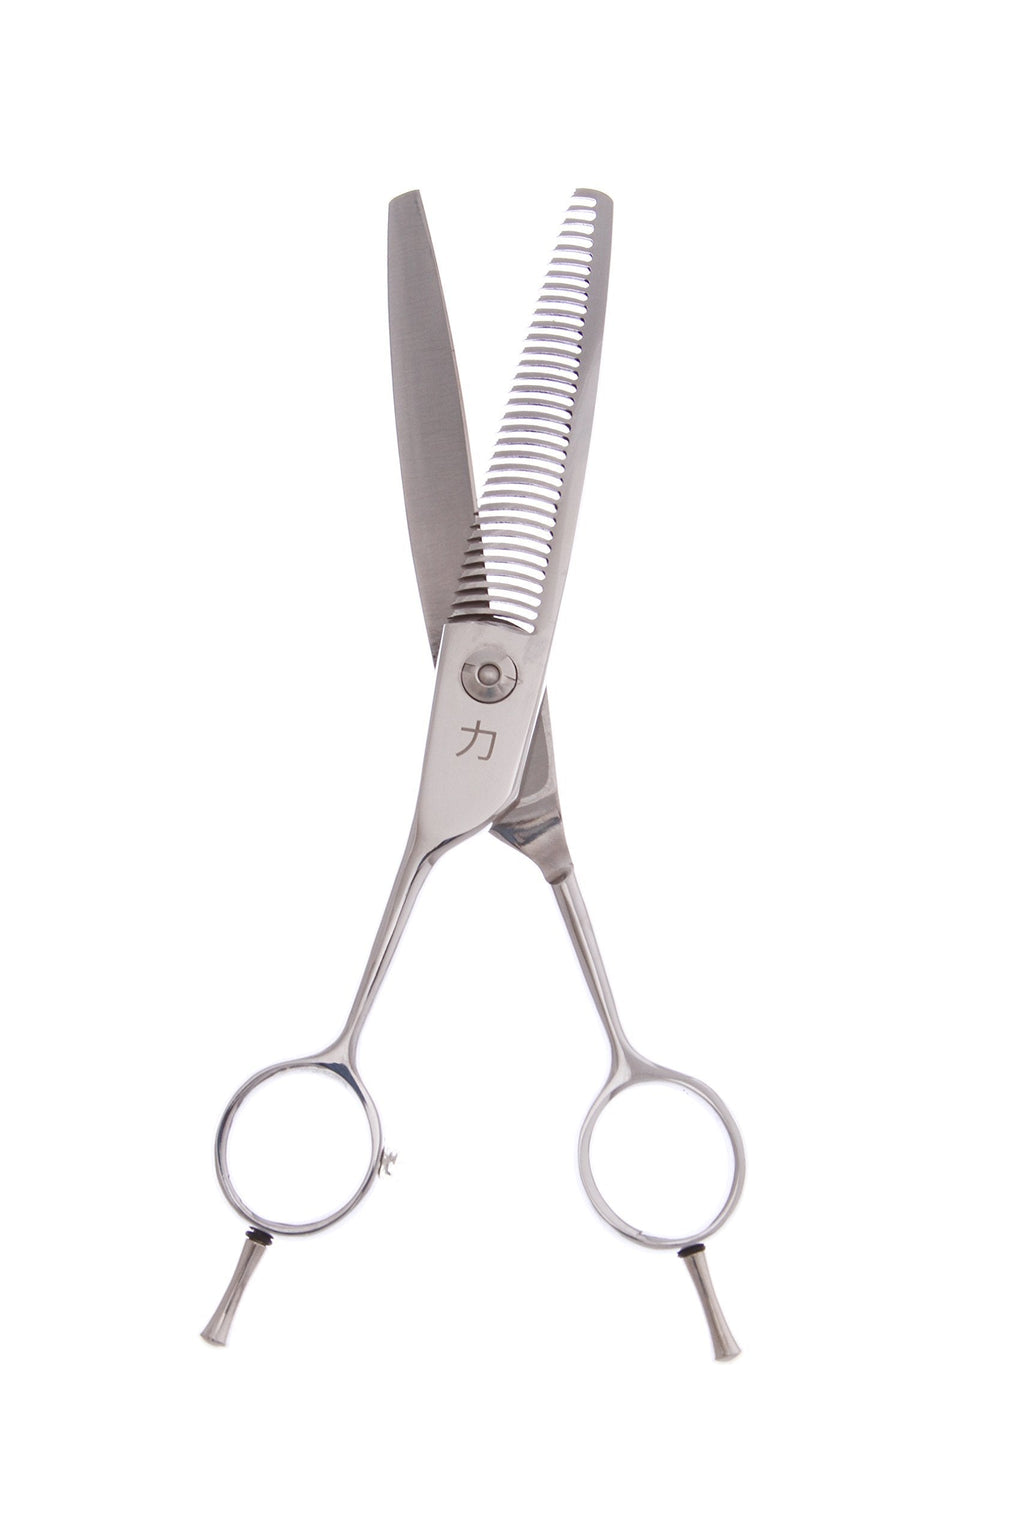 [Australia] - ShearsDirect CR51-33TL Stainless Steel 33 Teeth Left Handed Thinning Shear with Opposing Handle, 6" 